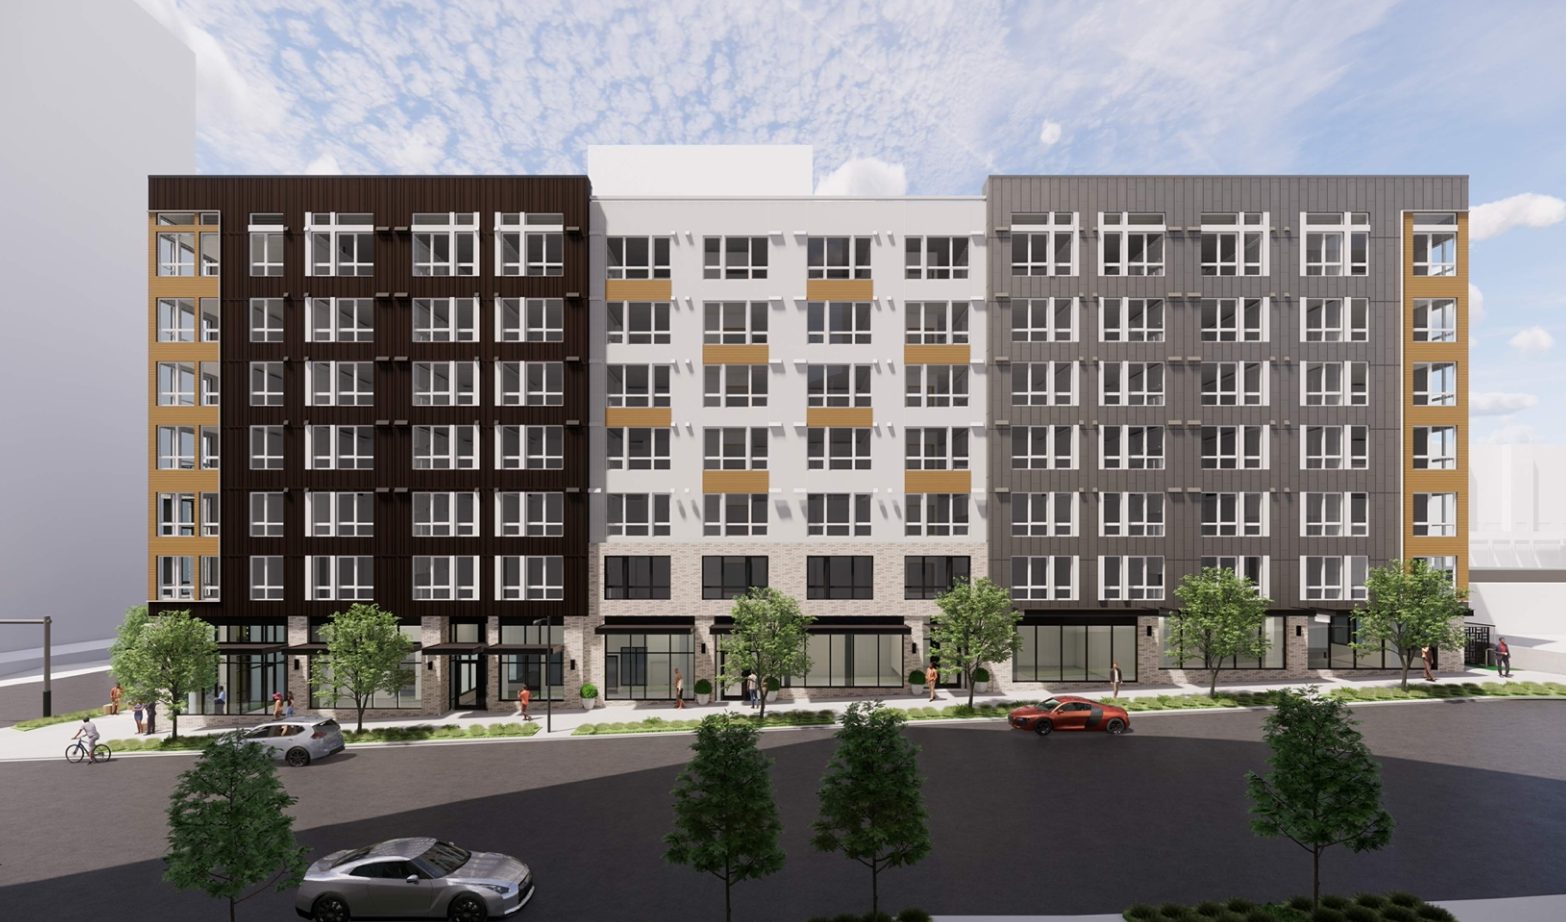 180-Unit Apartment Project at Site of Taco Time Receives Design Review